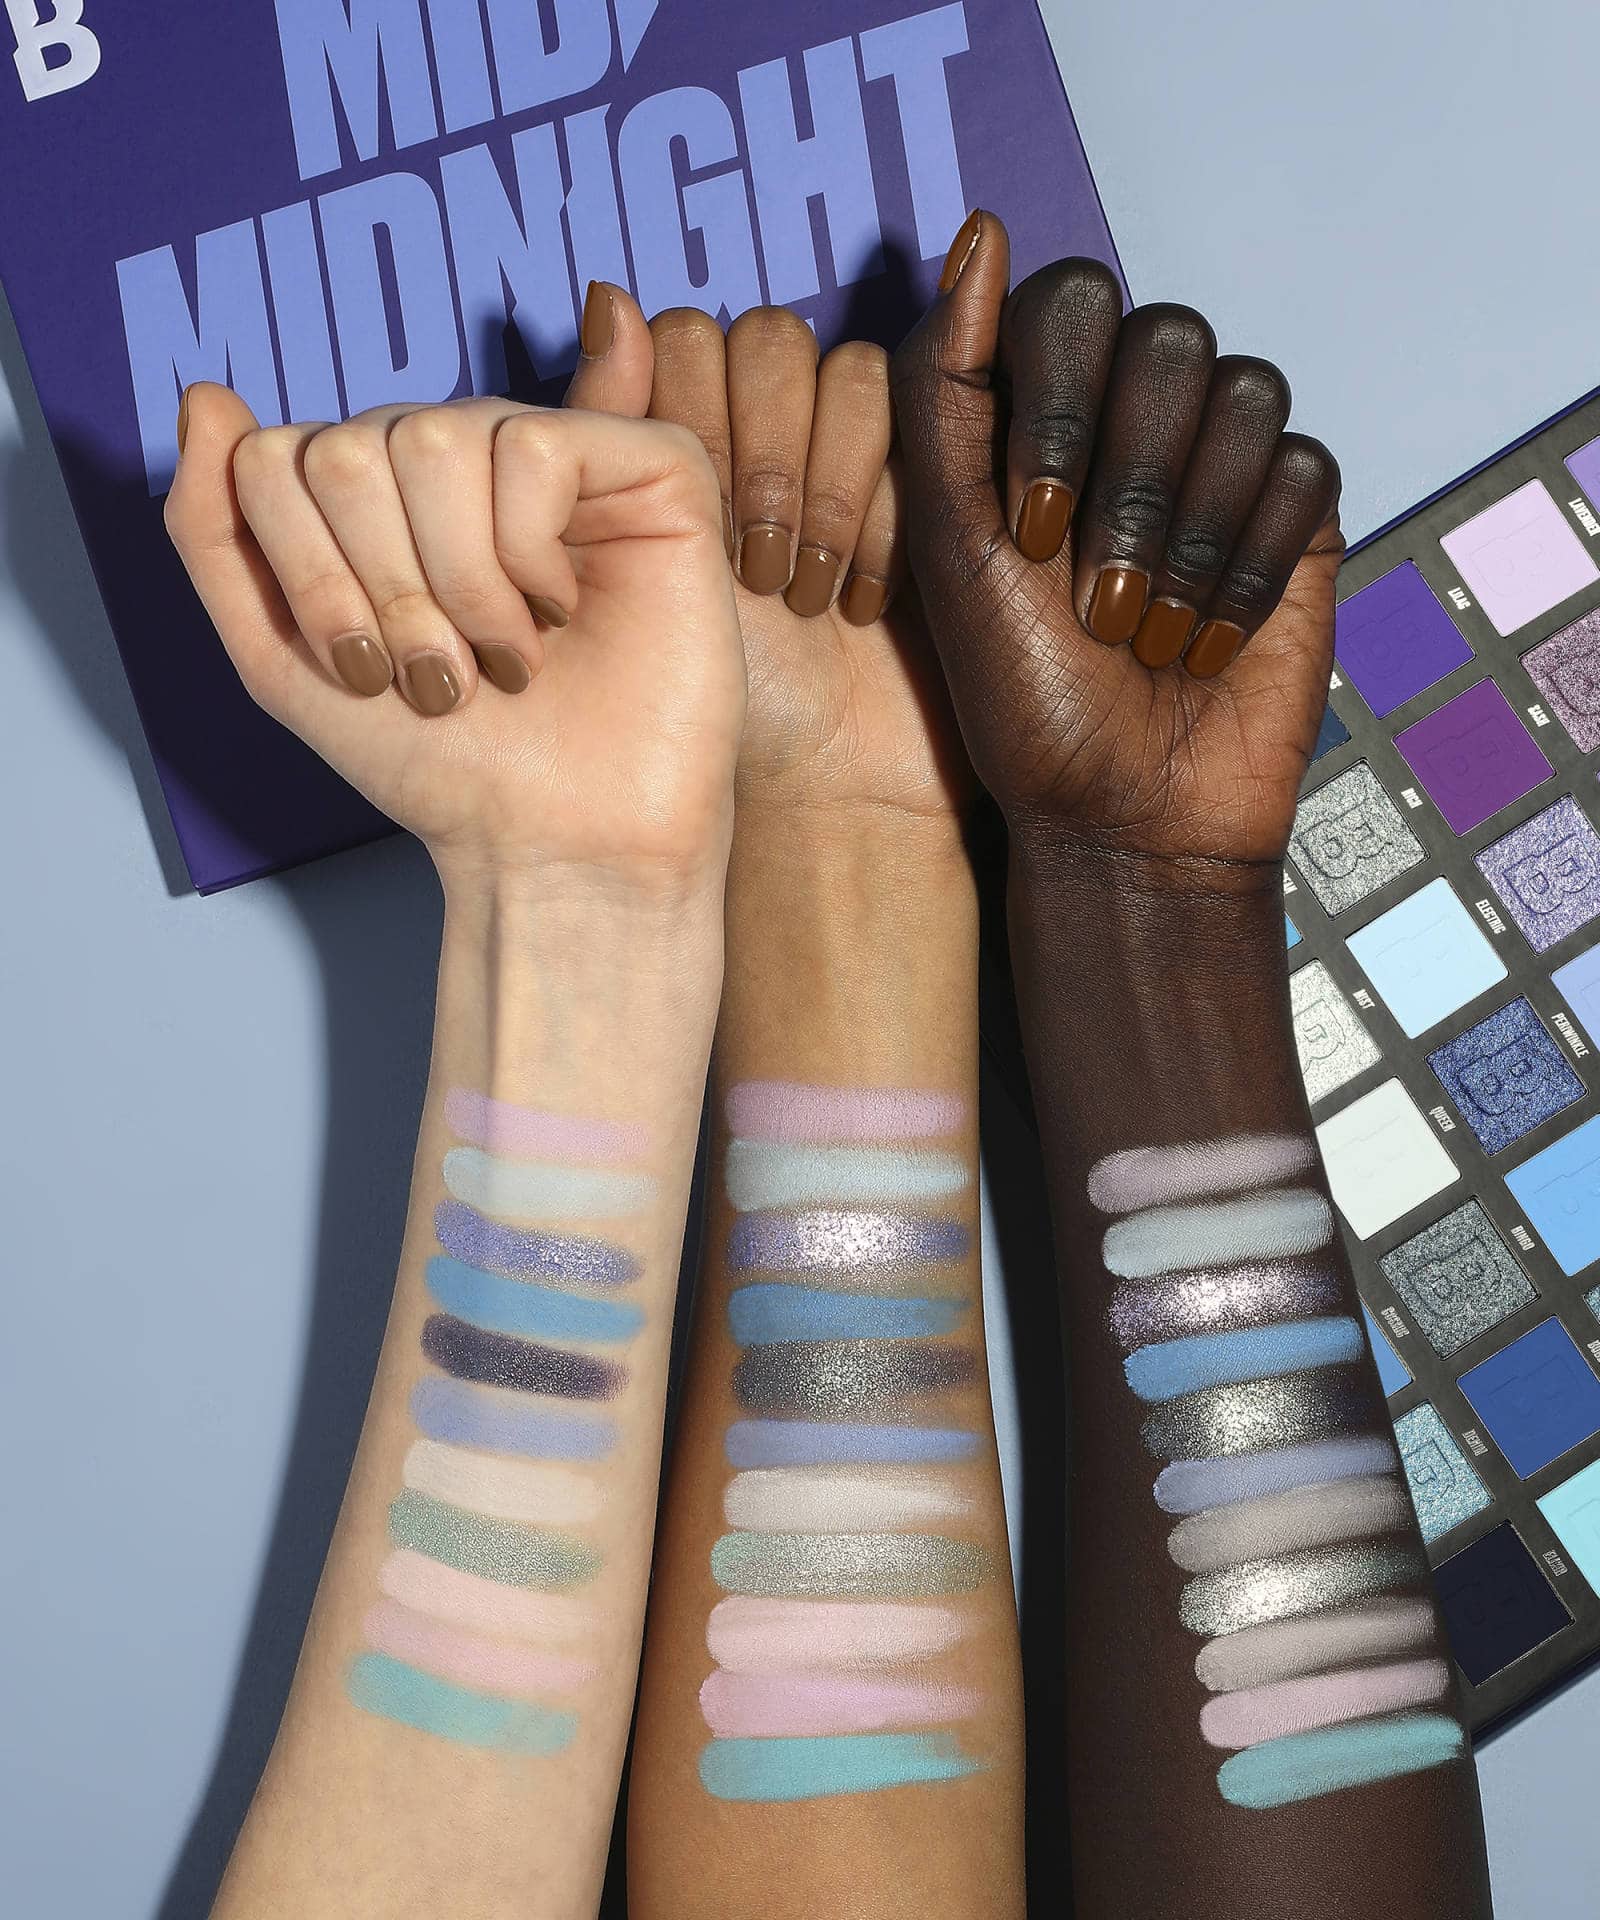 colour palette beautybay midnight swatches